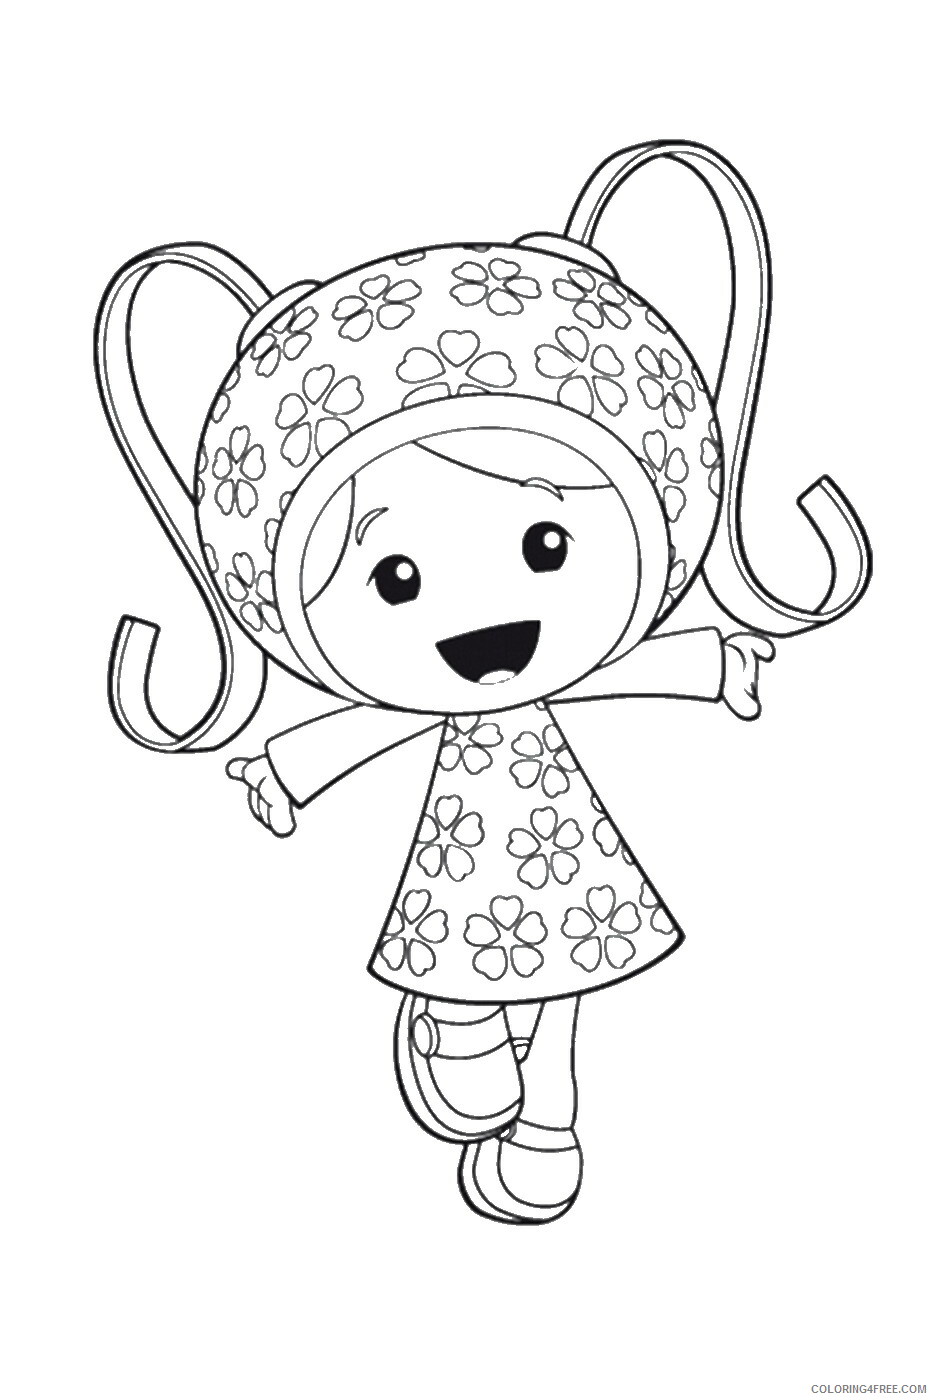 Team Umizoomi Coloring Pages TV Film Team Umizoomi 11 Printable 2020 08447 Coloring4free